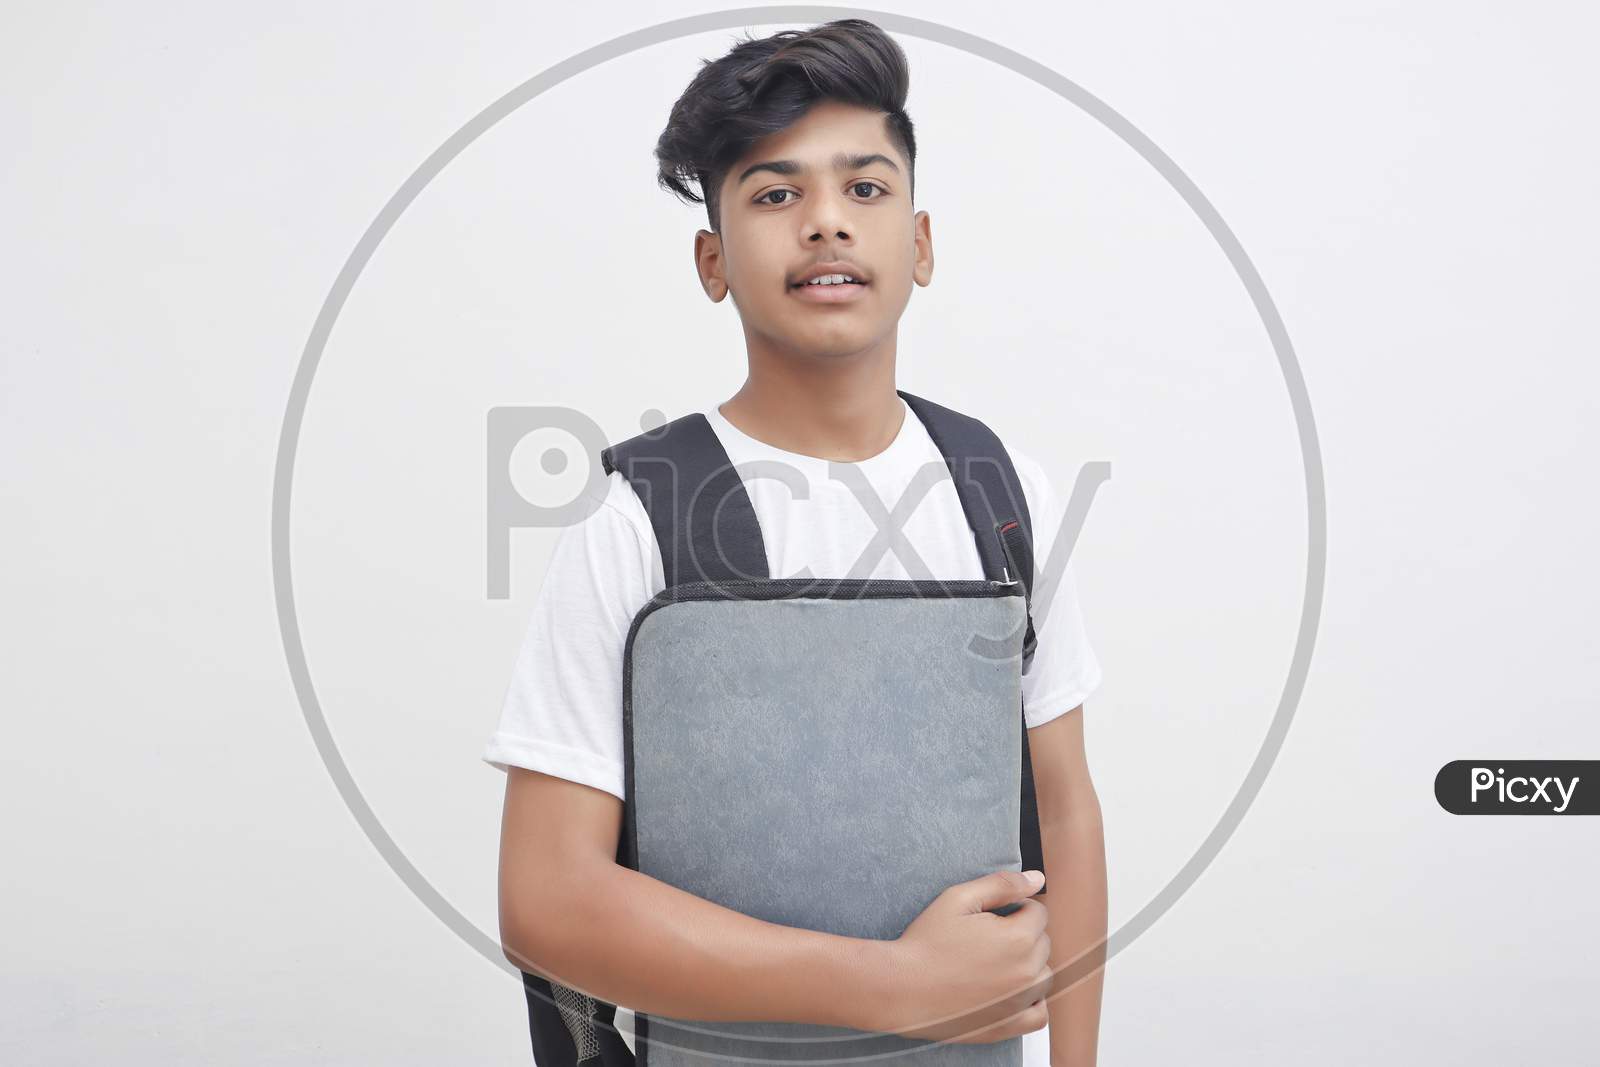 Young Indian Student Holding File In Hand.